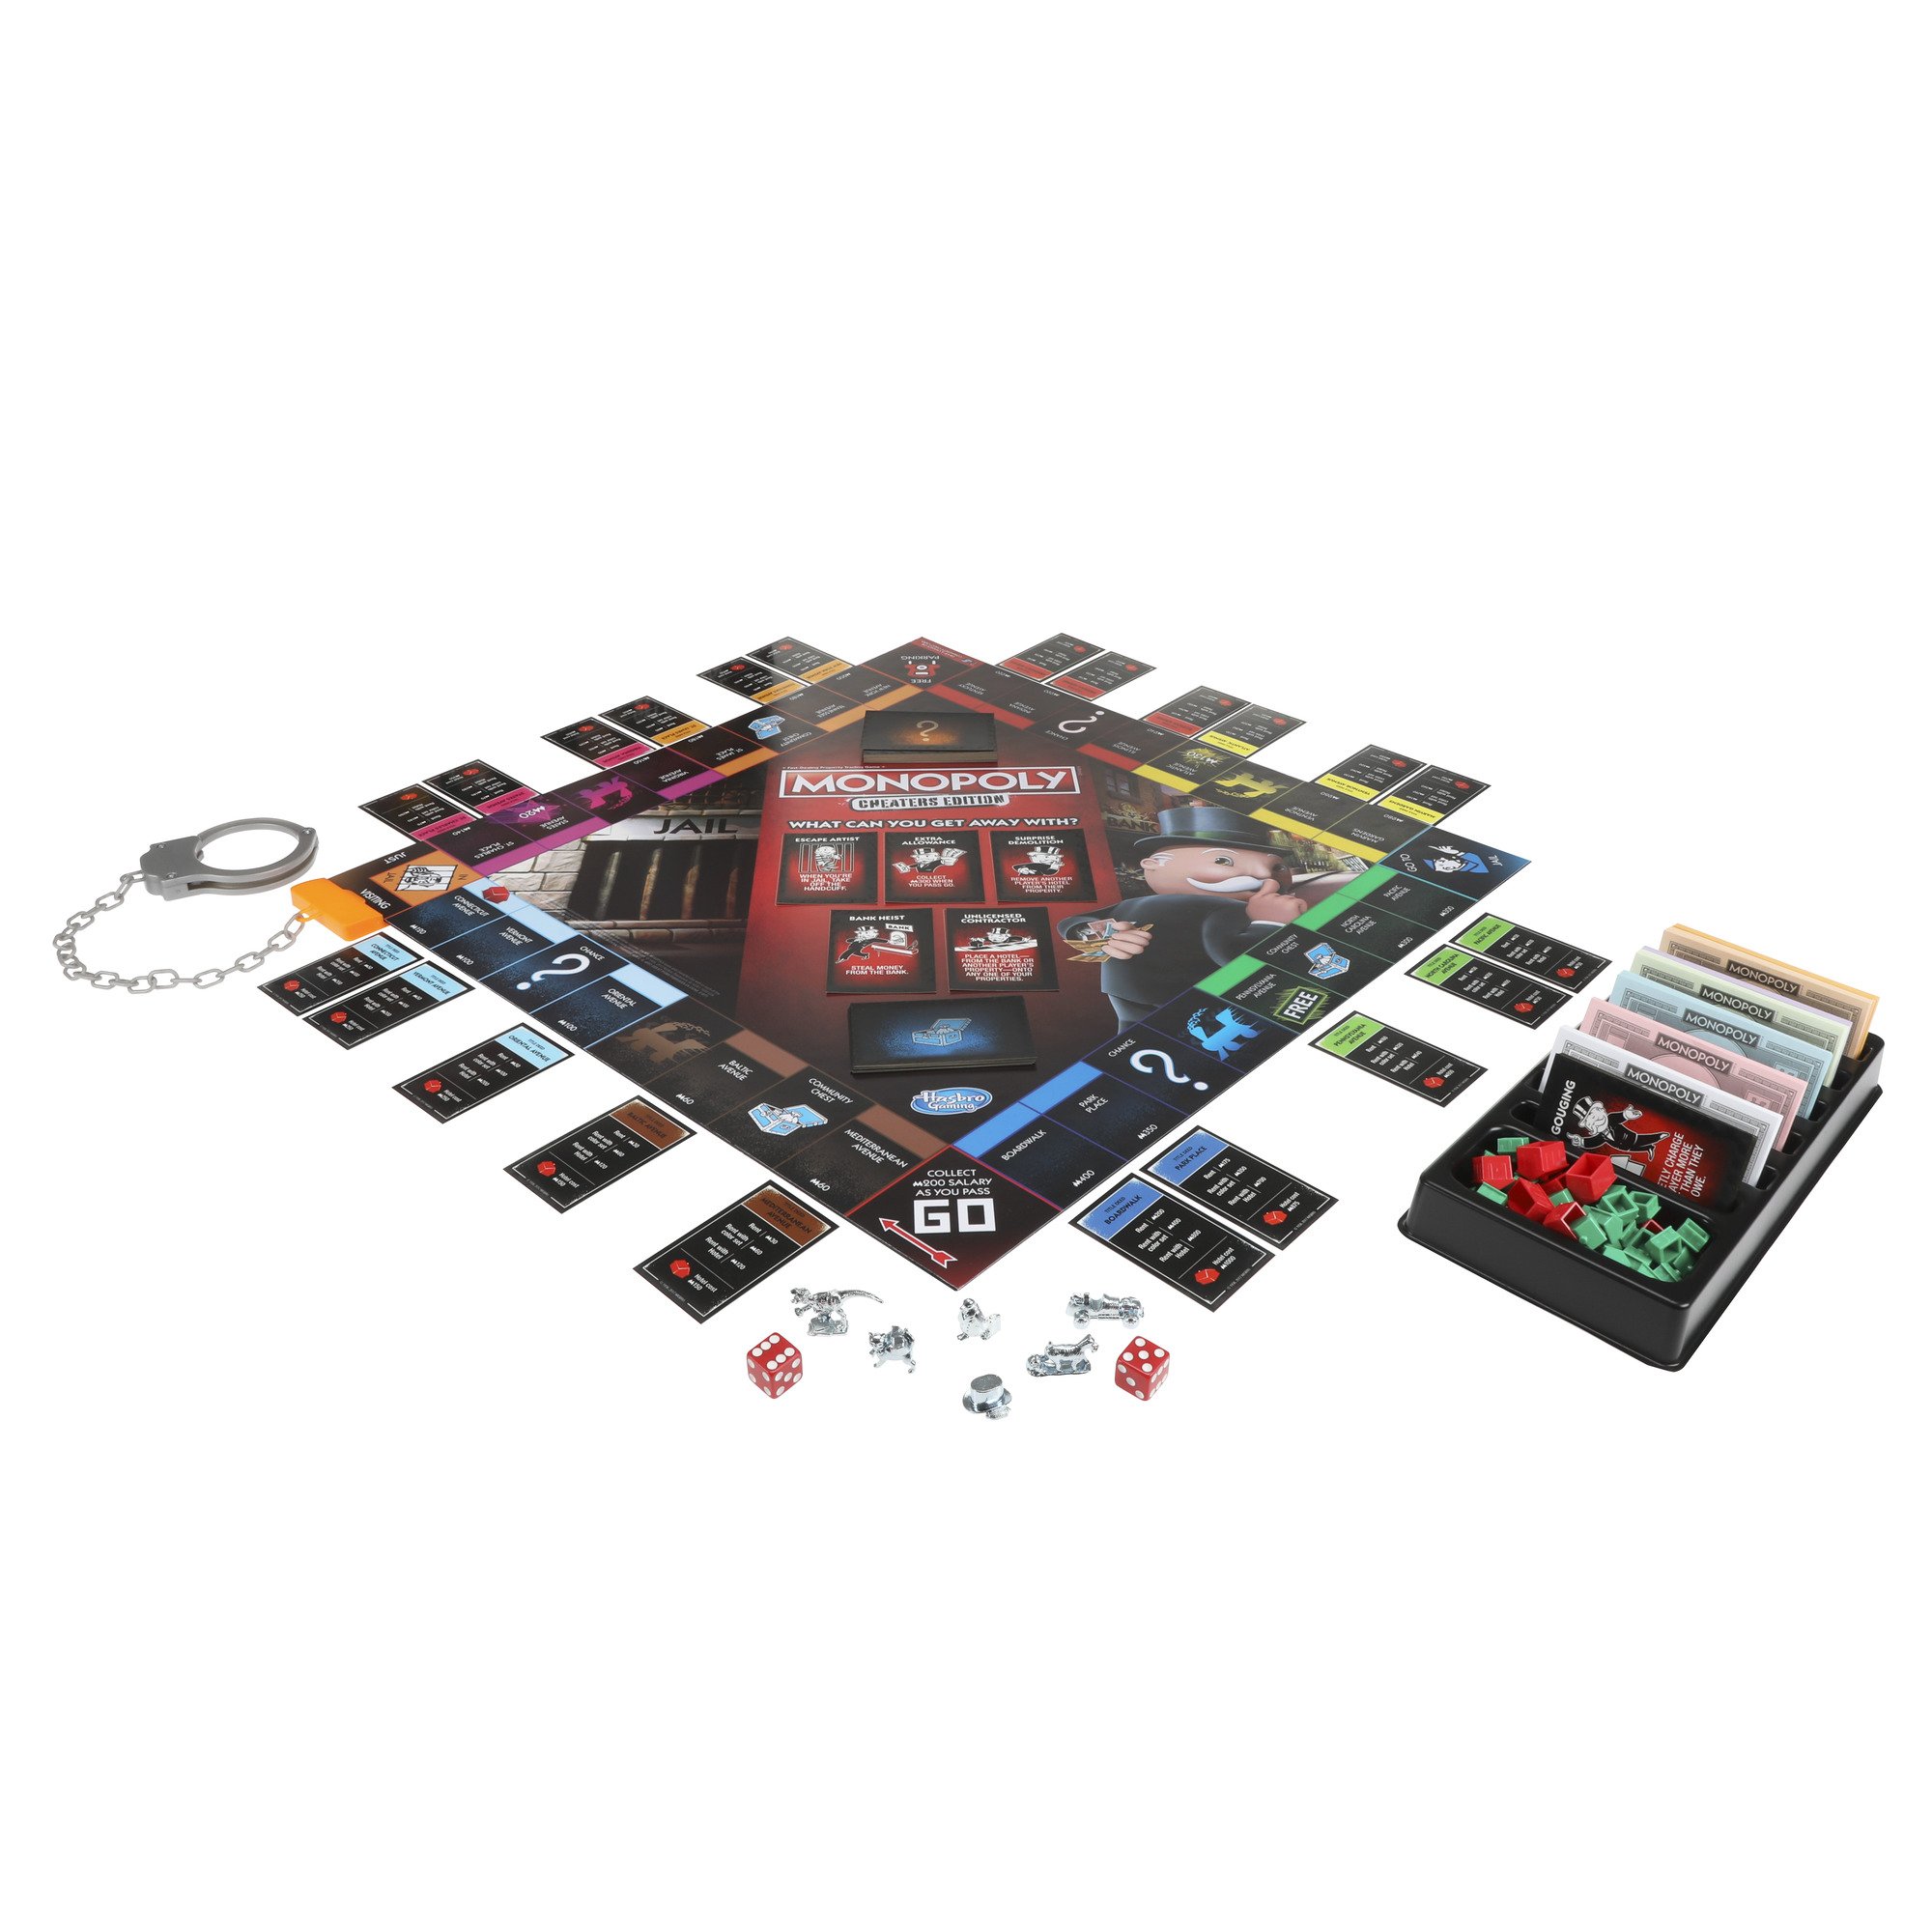 Monopoly Game: Cheaters Edition Board Game, for 3-6 players, Ages 8 and Up